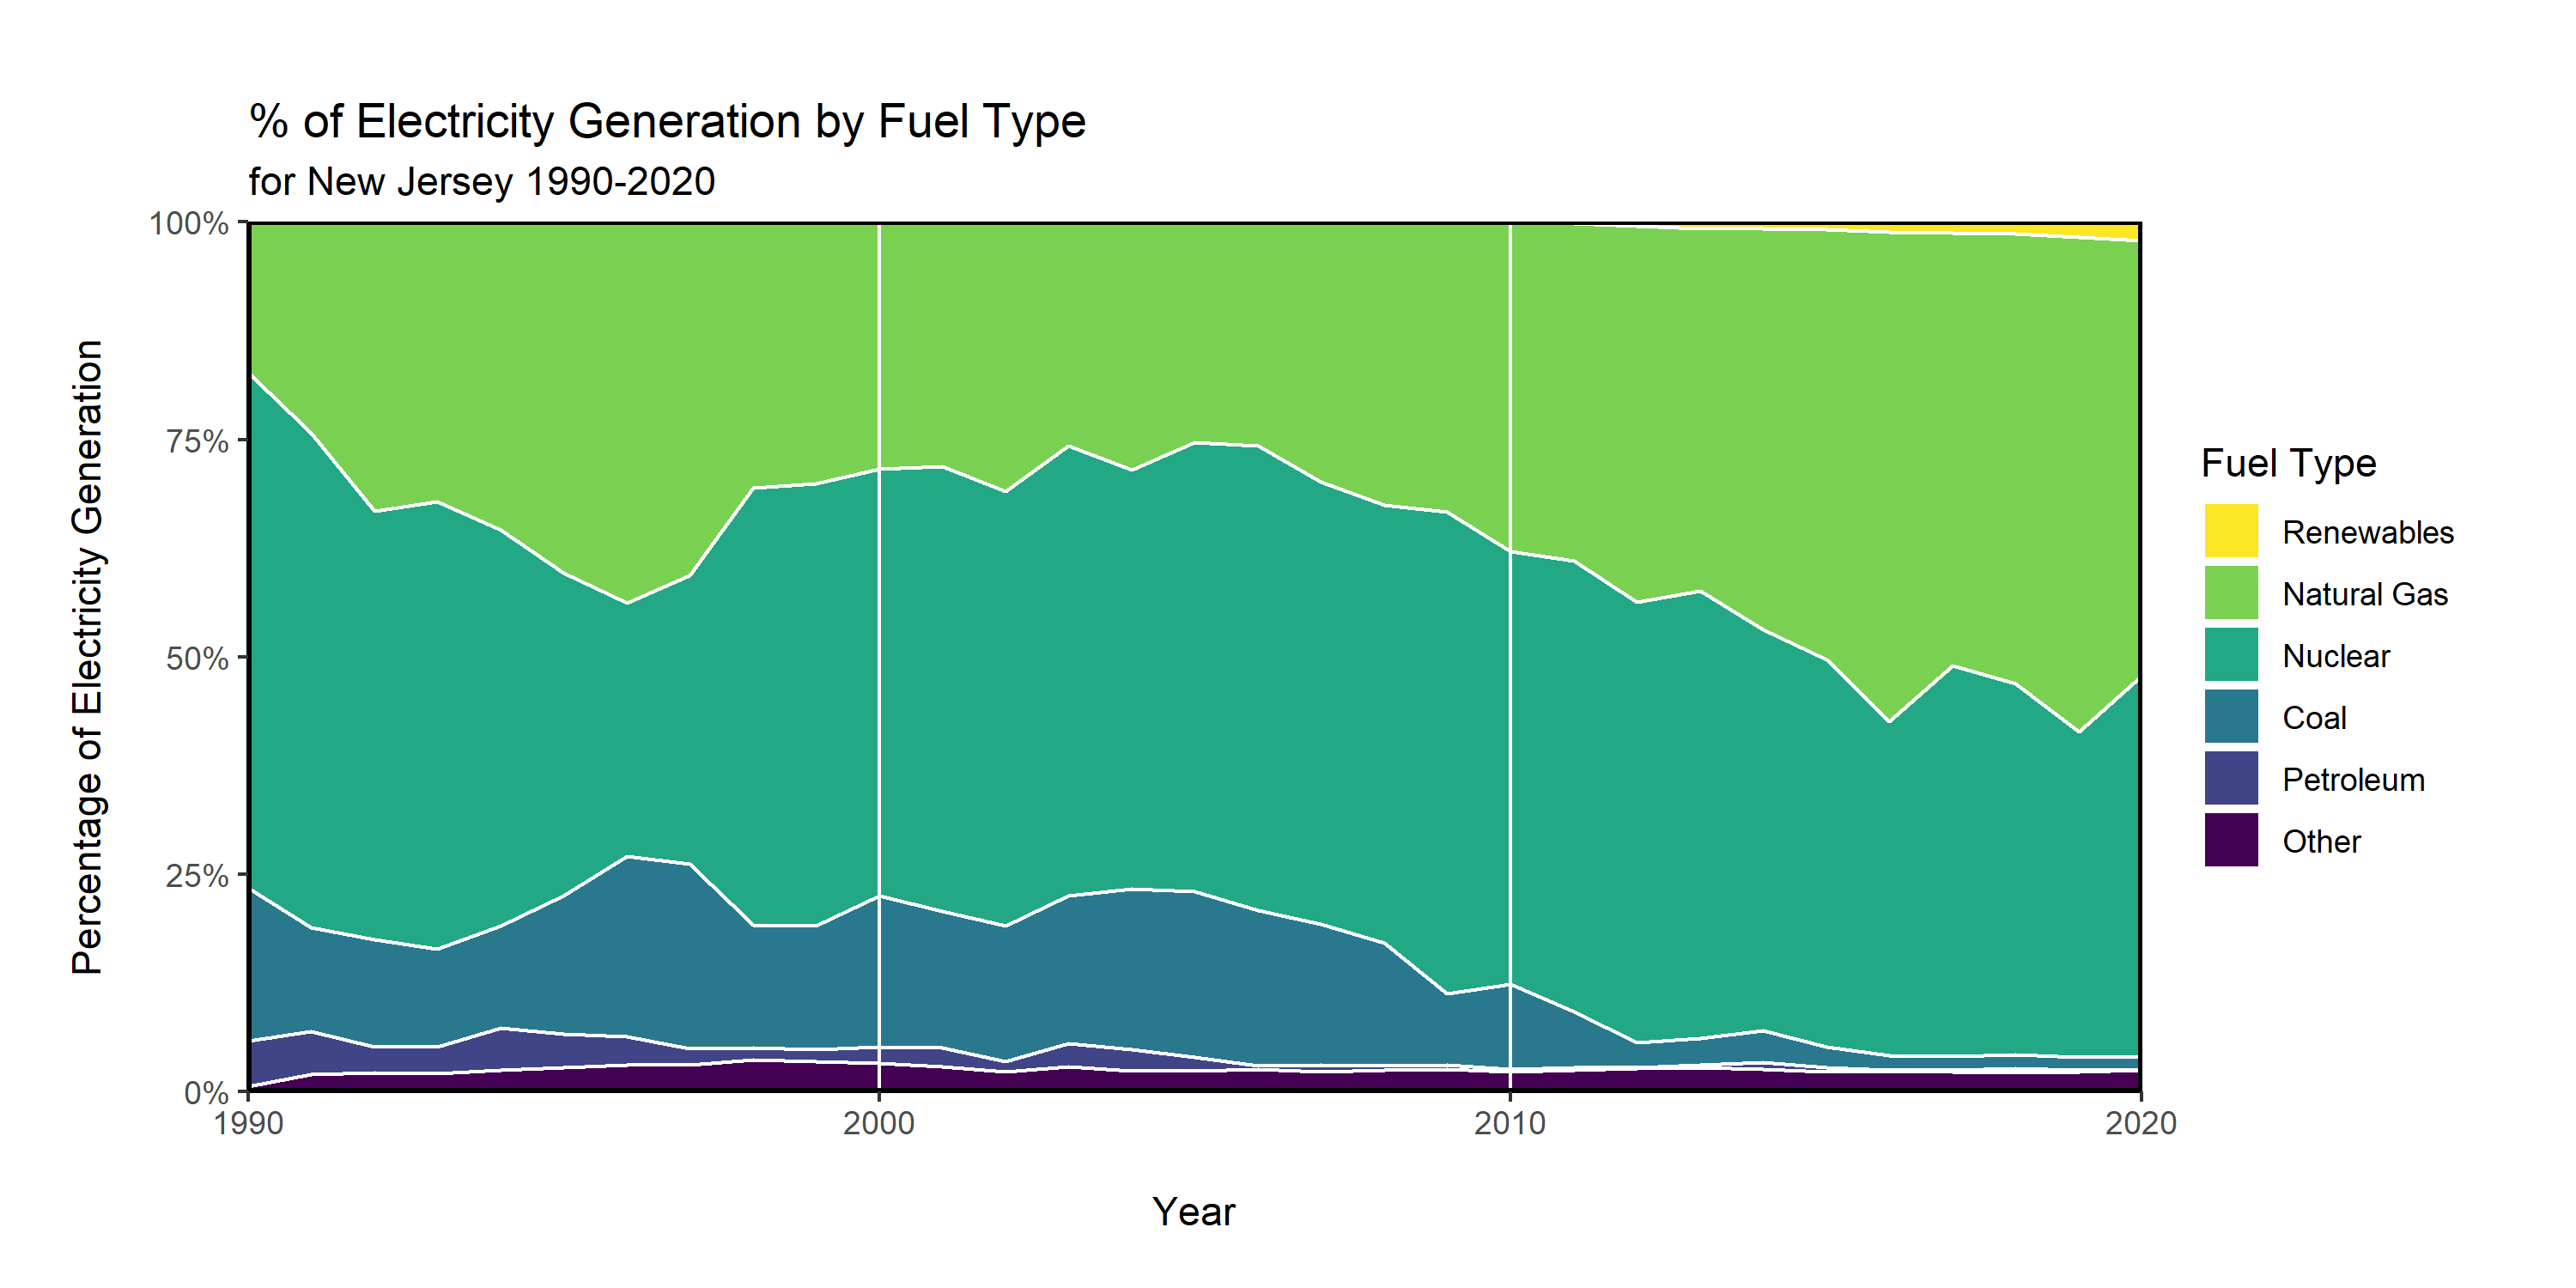 % of Electricity Generation by Fuel Type Trend